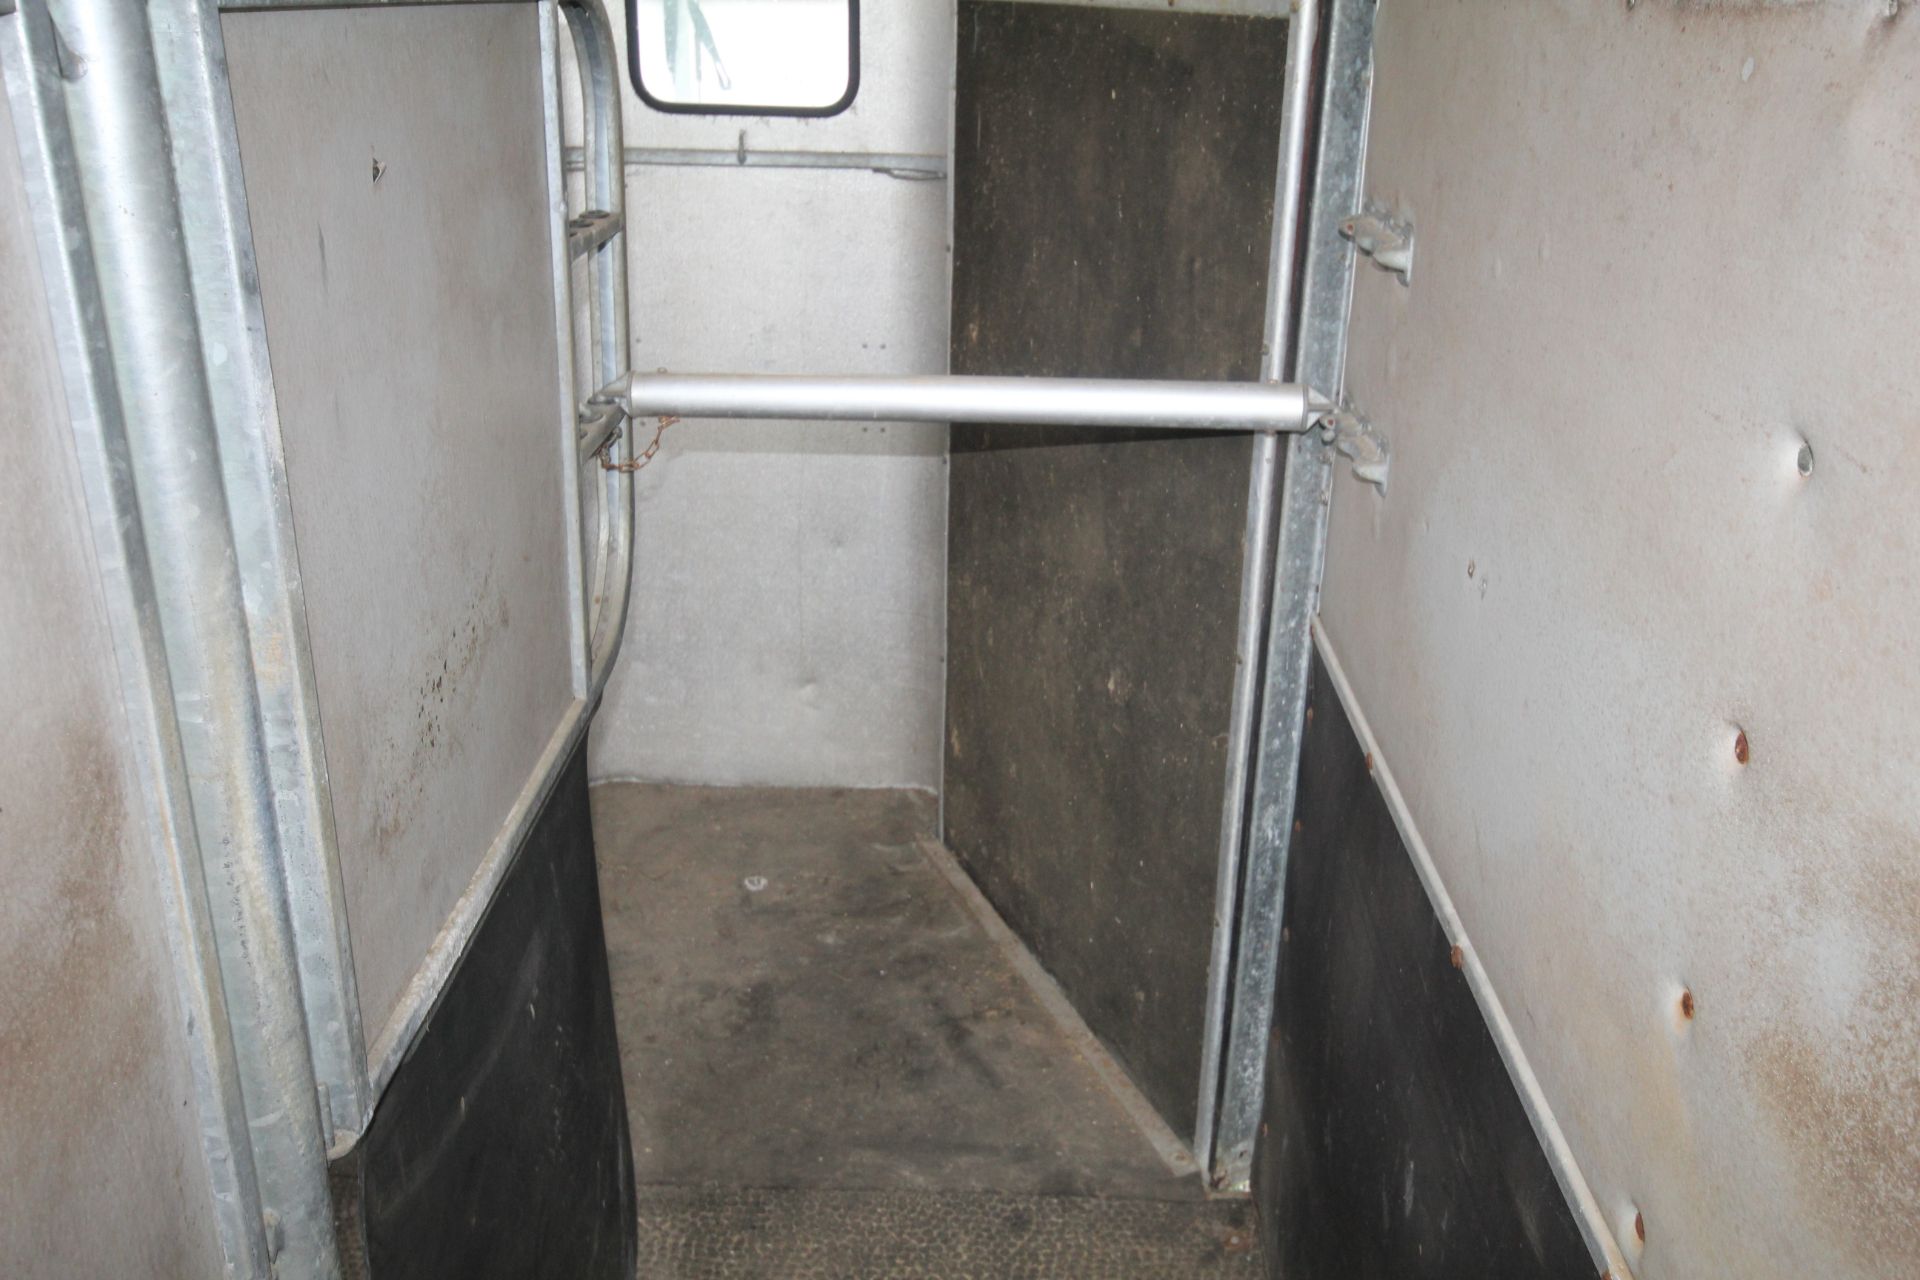 Ifor Williams 505 two horse twin axle horsebox. Recent new floor fitted by main dealer. - Bild 32 aus 44